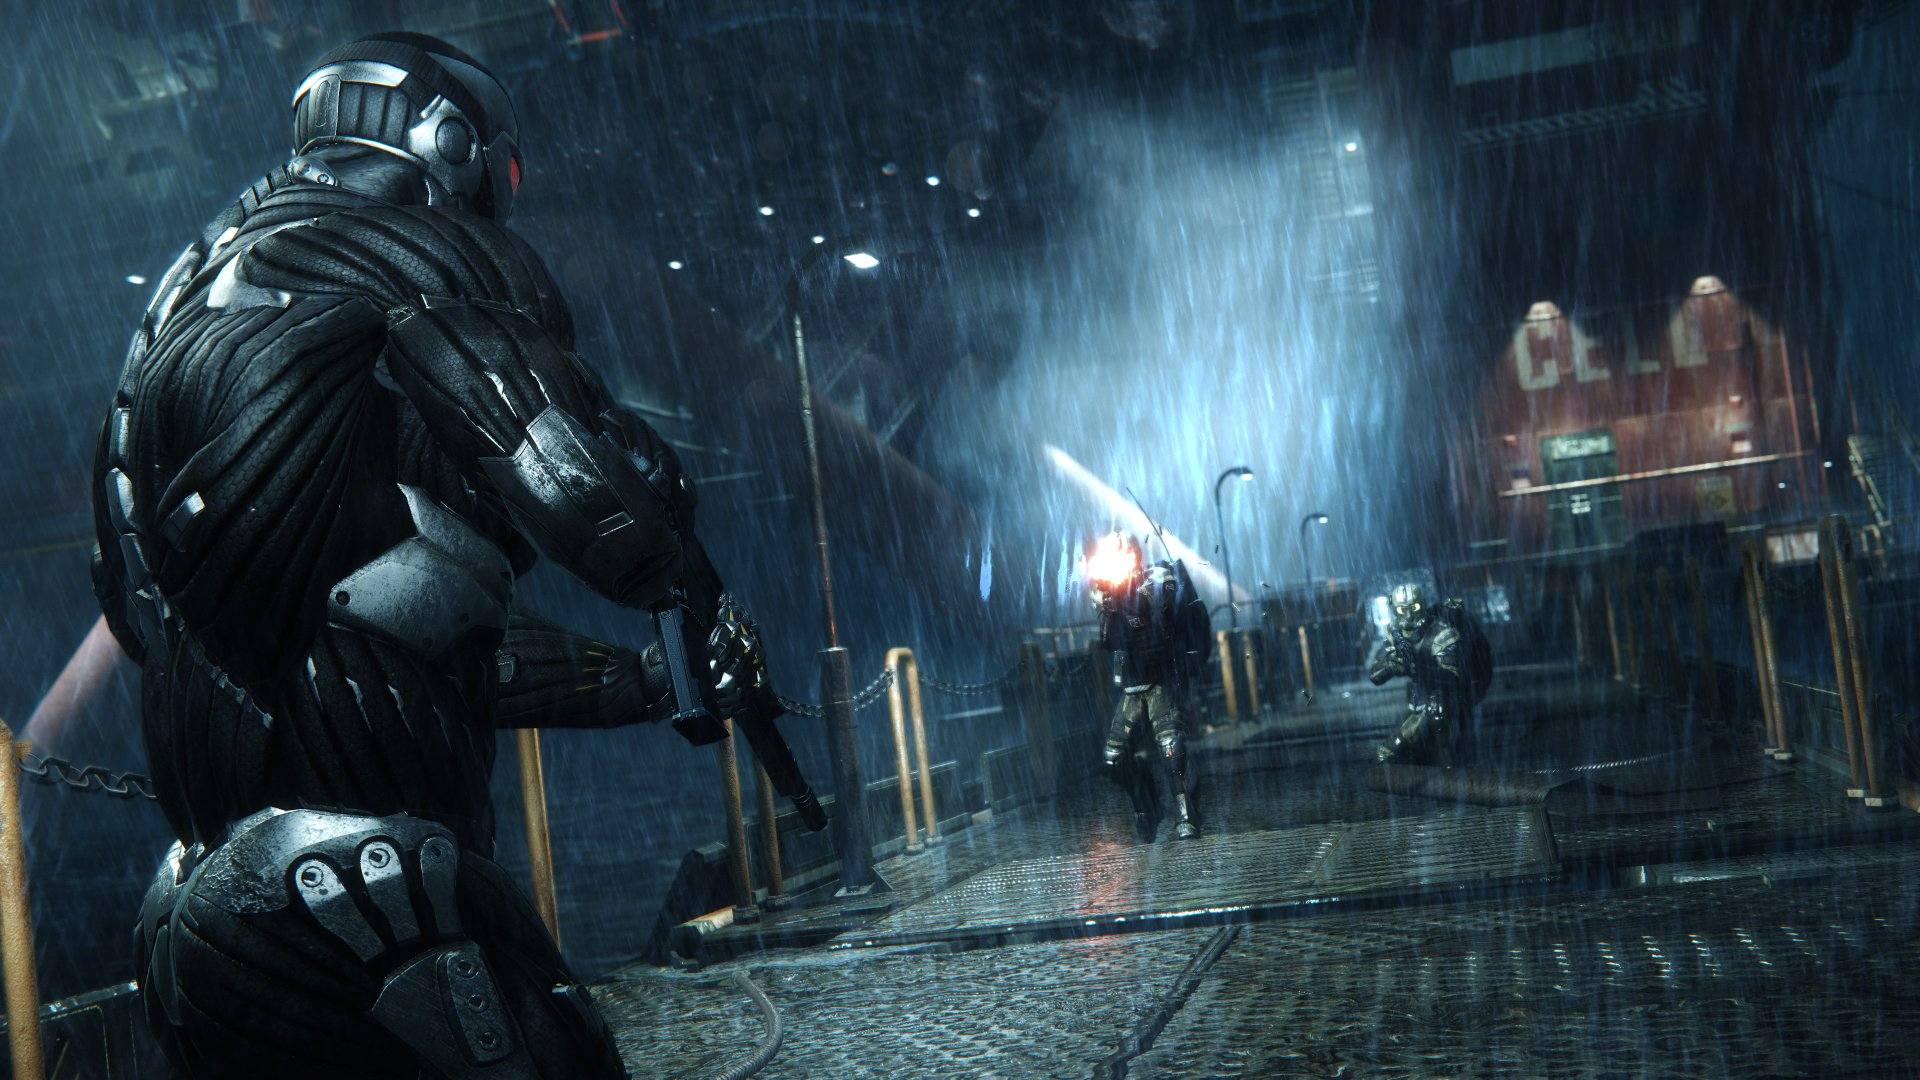 will there be a crysis 4